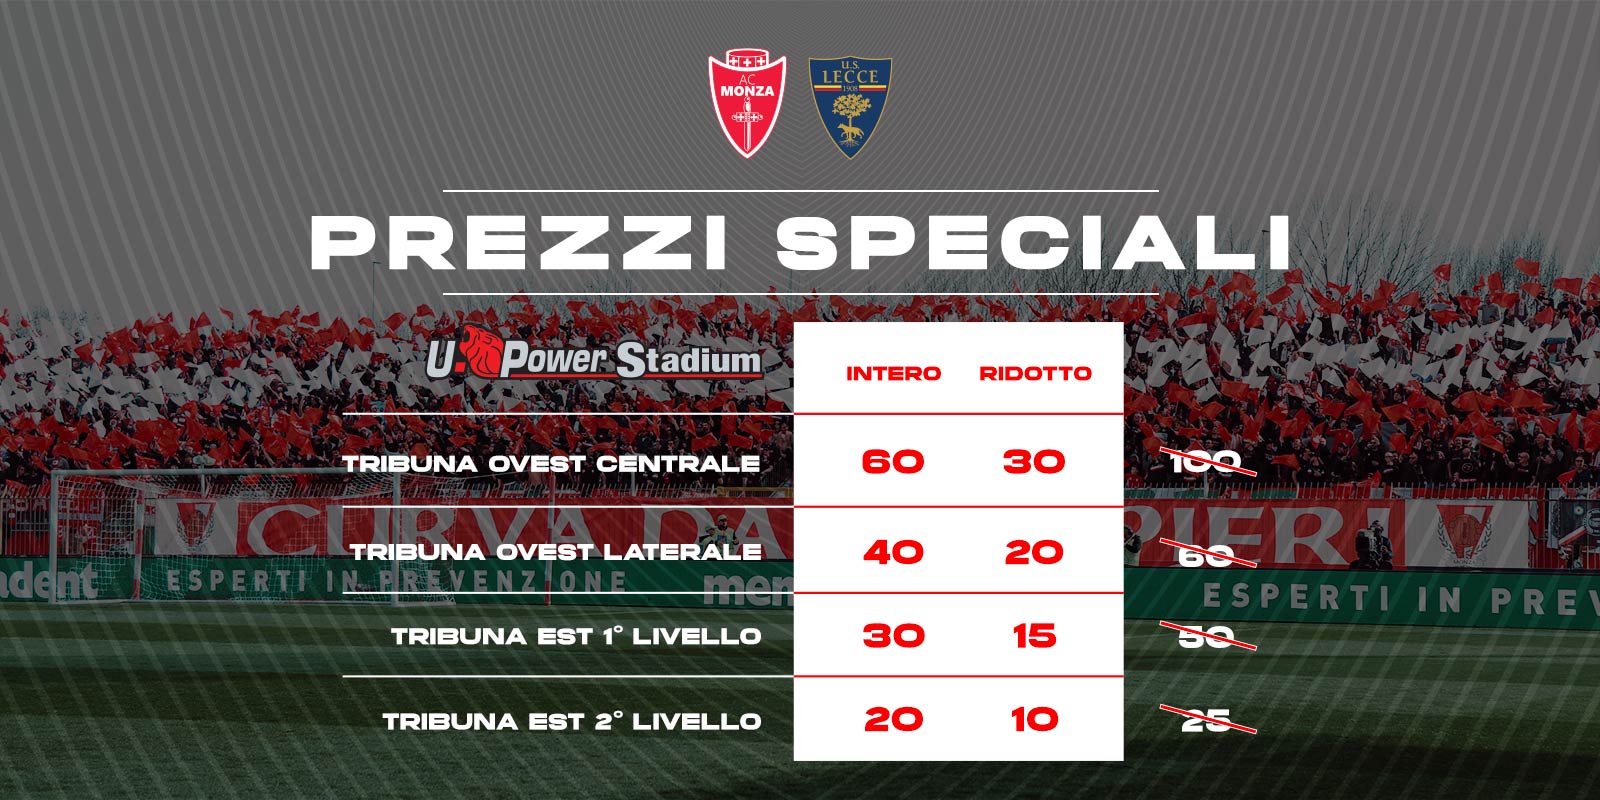 INFO TICKETS: SPECIAL PRICES FOR MONZA - LECCE